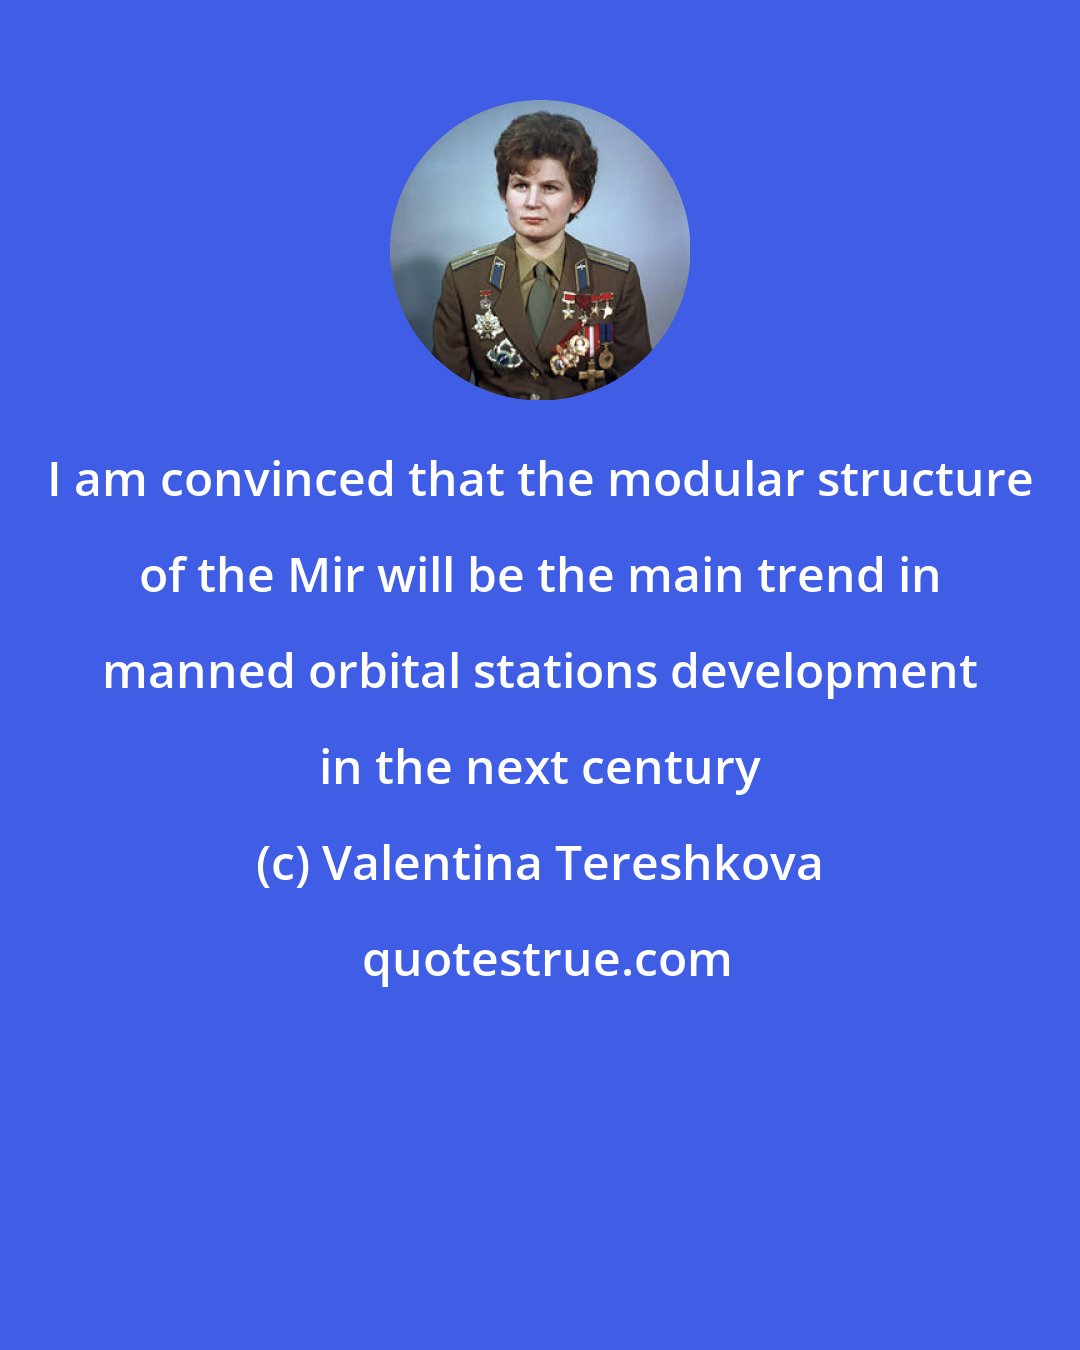 Valentina Tereshkova: I am convinced that the modular structure of the Mir will be the main trend in manned orbital stations development in the next century